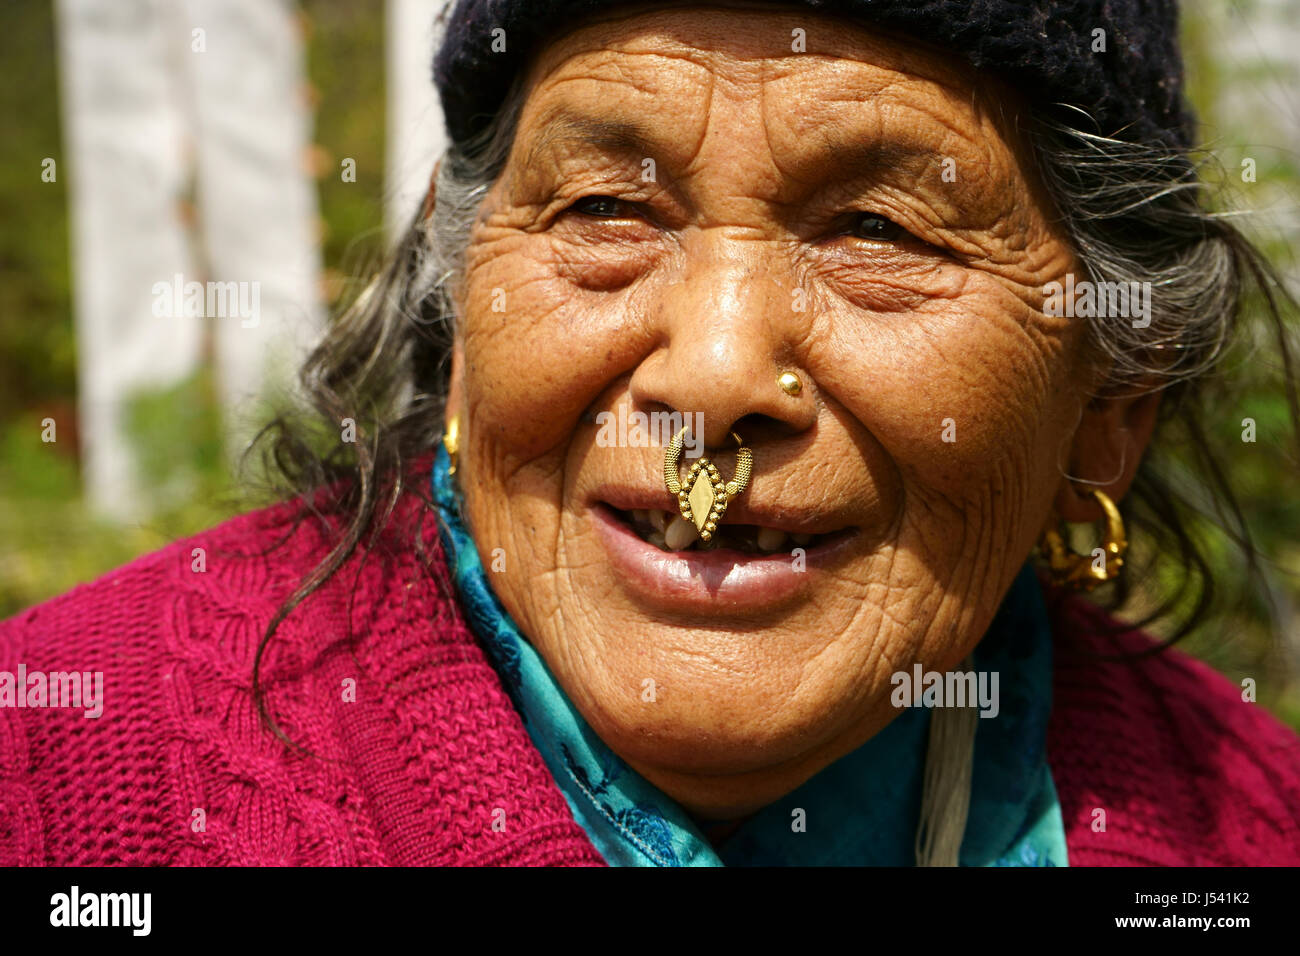 Older women of the Grurung tribe with traditional jewelery, a golden ring in nose and earrings. Yuksom, Sikkim, India Stock Photo